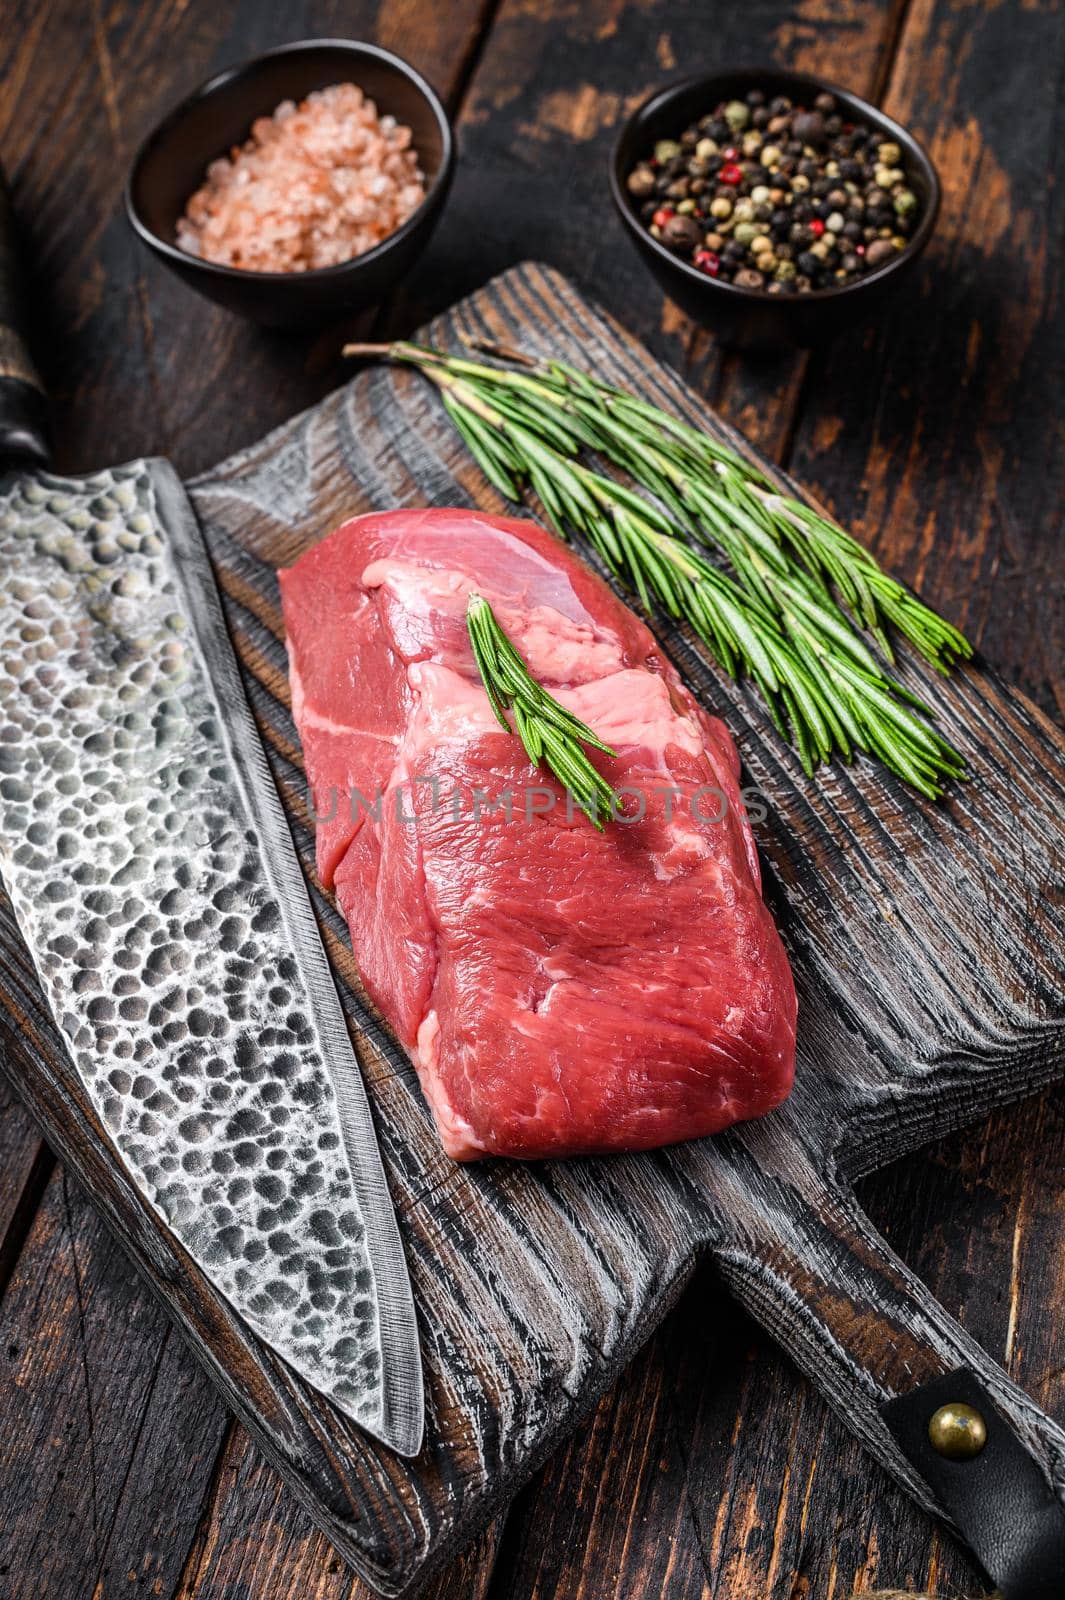 Raw lamb meat steak on a wooden cutting board with herbs. Dark wooden background. Top view.